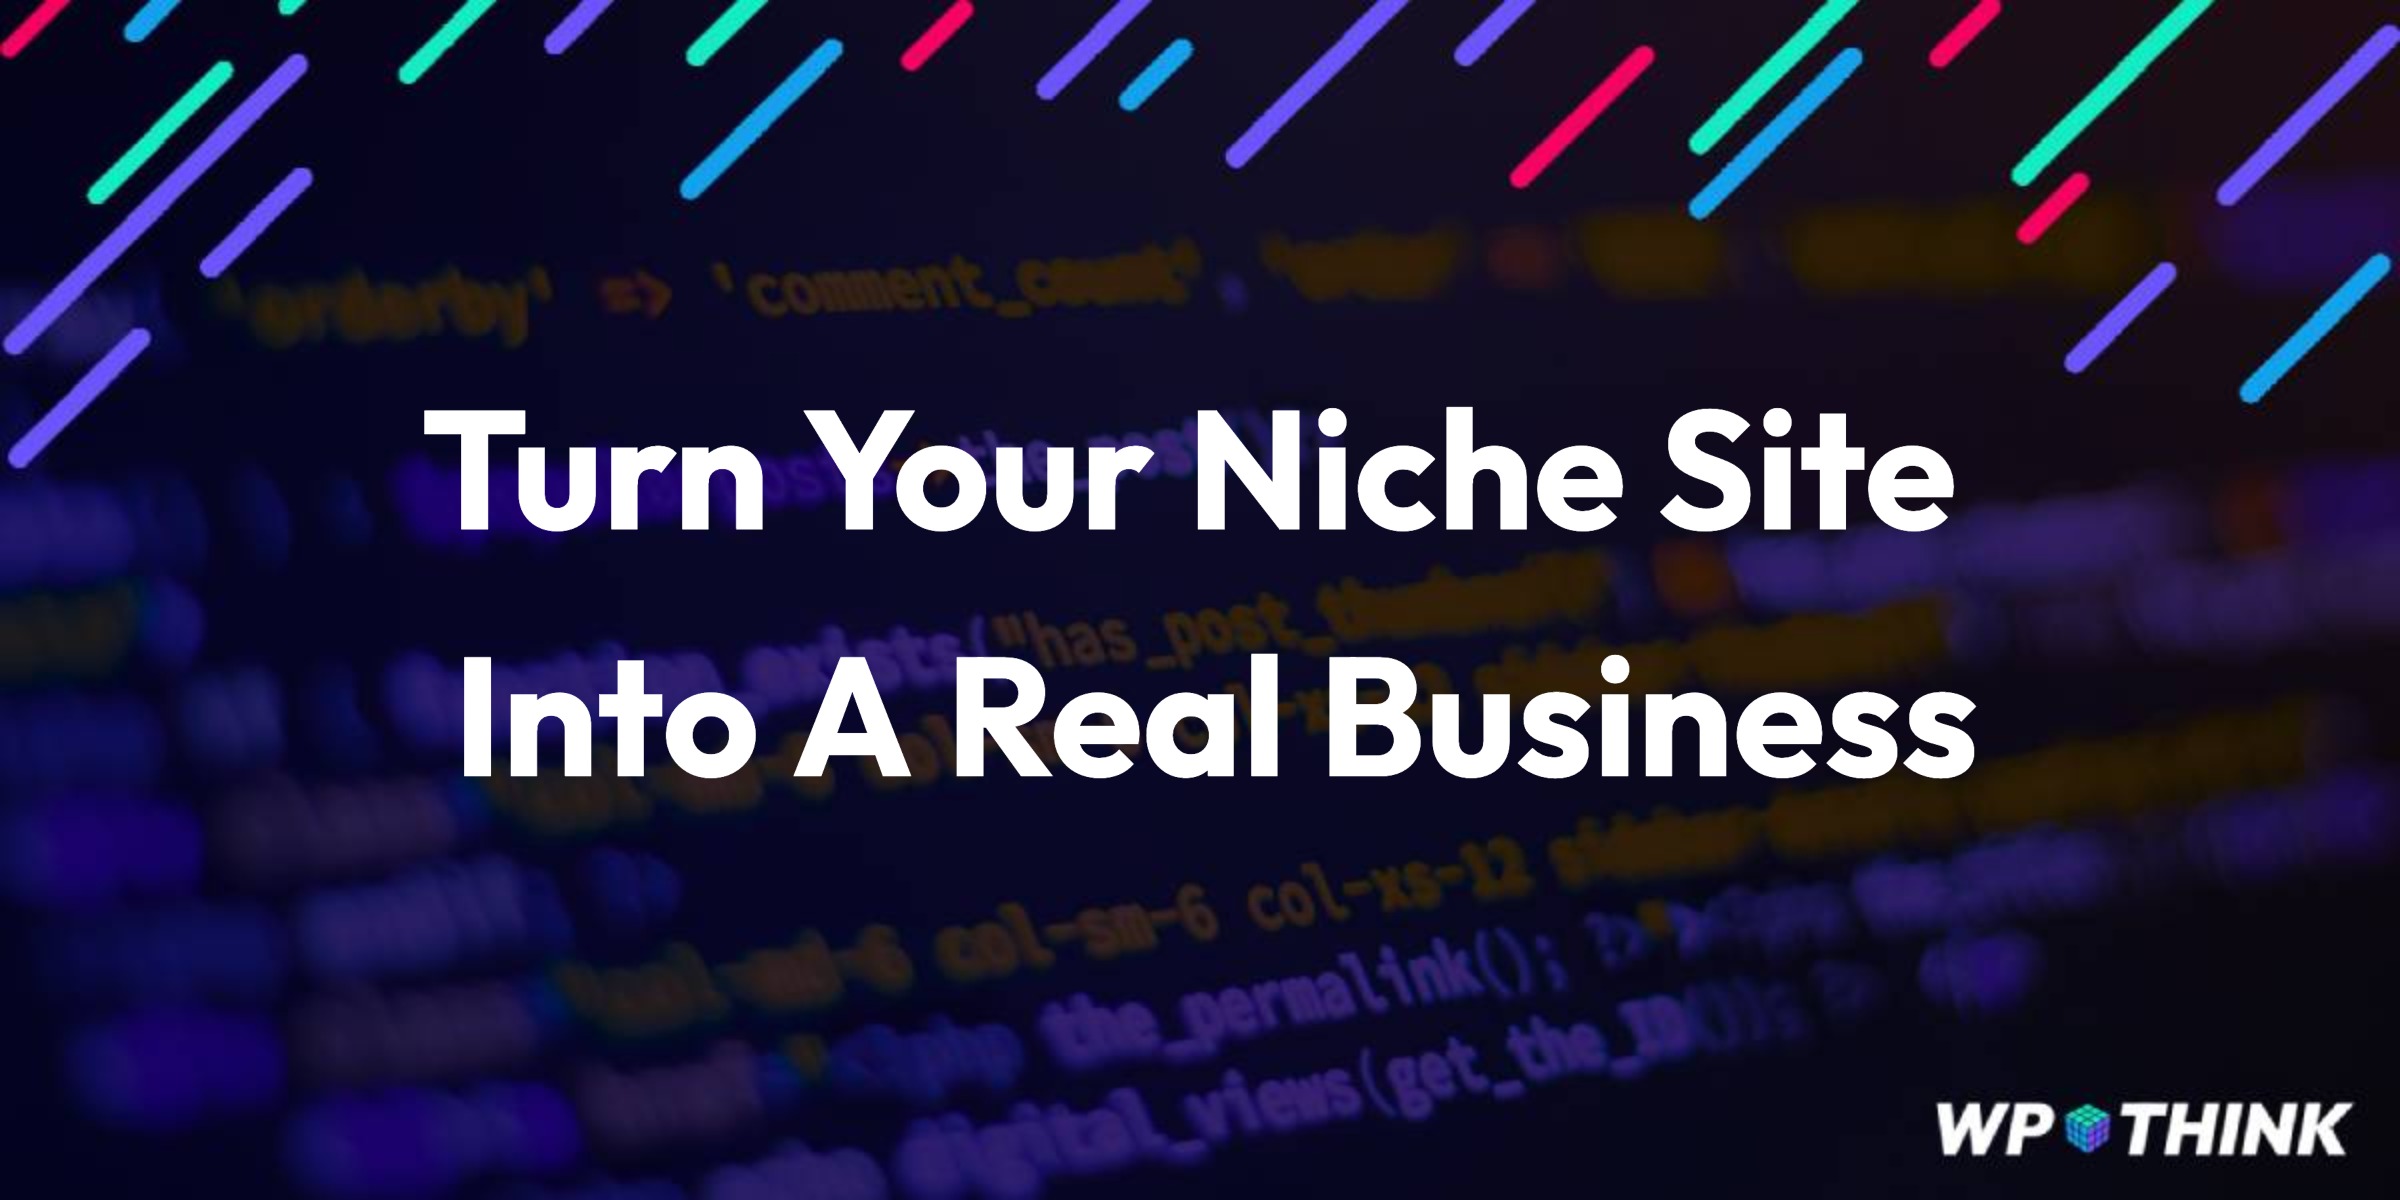 11 Ways To Completely Evolve Your Niche Site Into A Real Business internal link